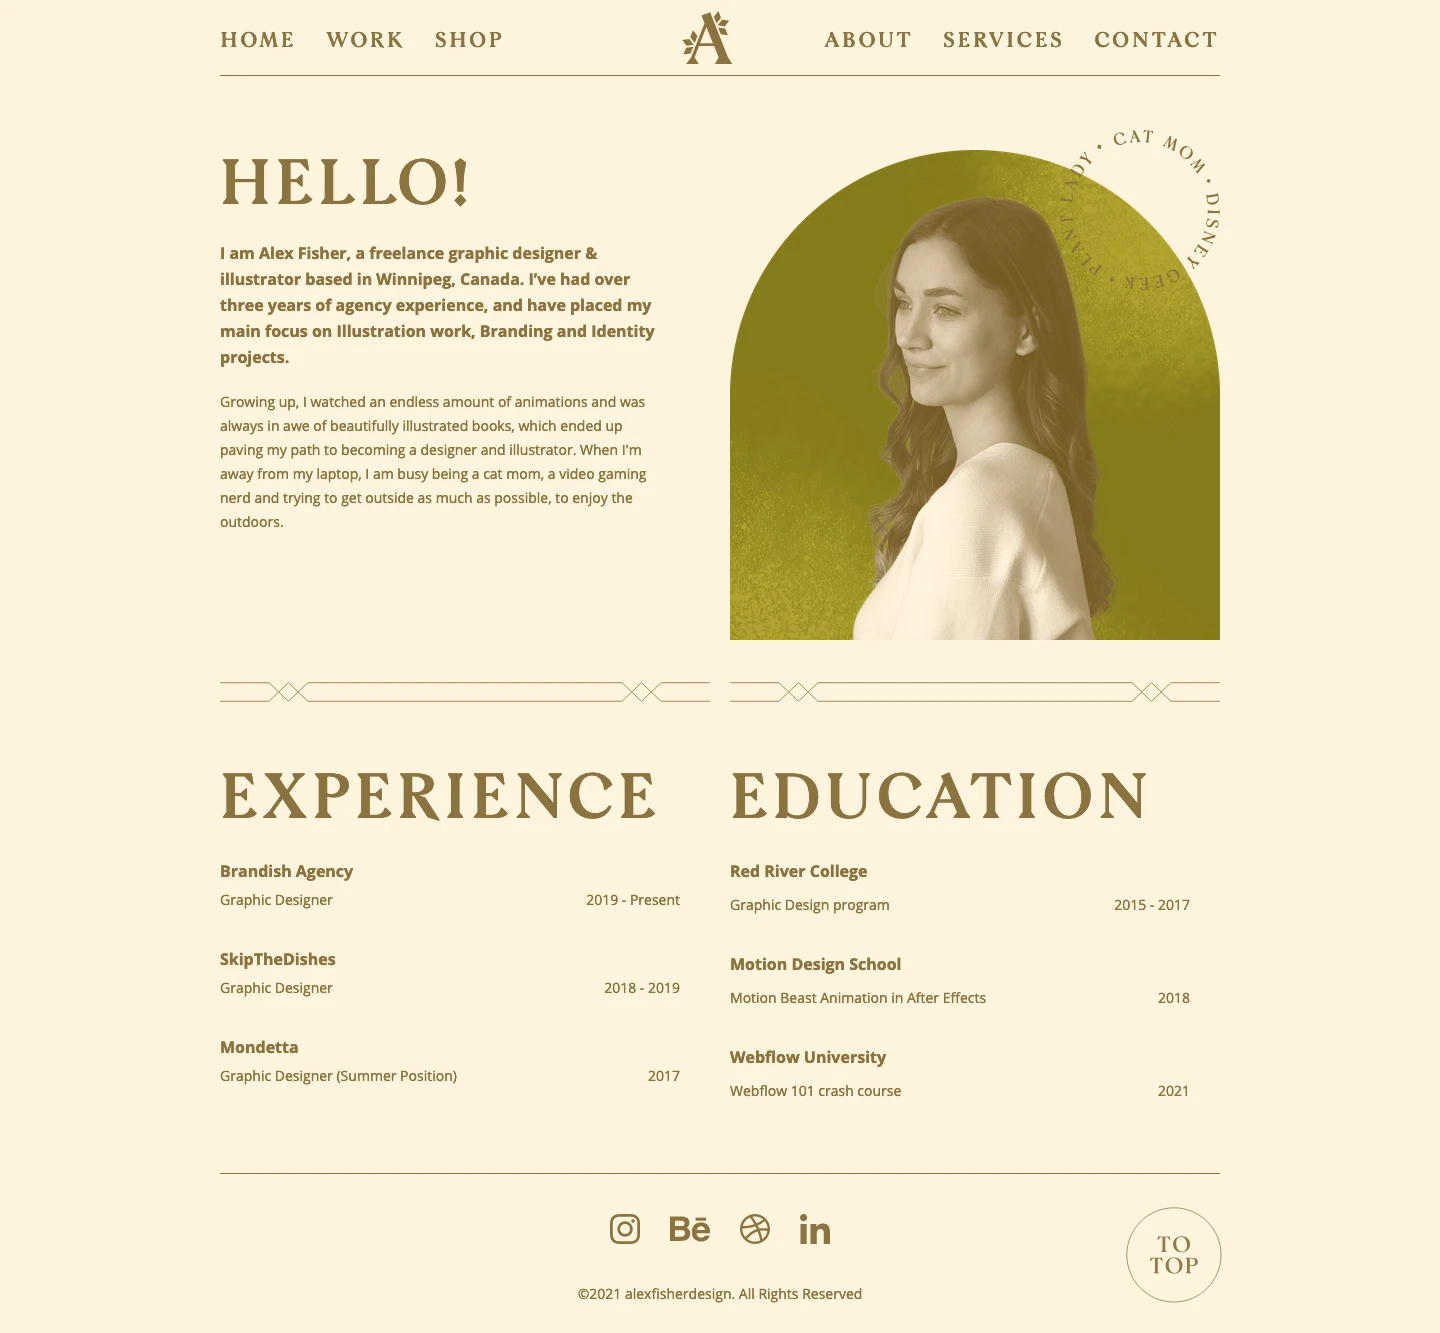 Alex Fisher Design Landing Page Example: I’m Alex Fisher, a freelance graphic designer & illustrator based in Winnipeg, Canada. I’ve had over three years of agency experience, and have placed my main focus on illustration work, branding and Identity projects.